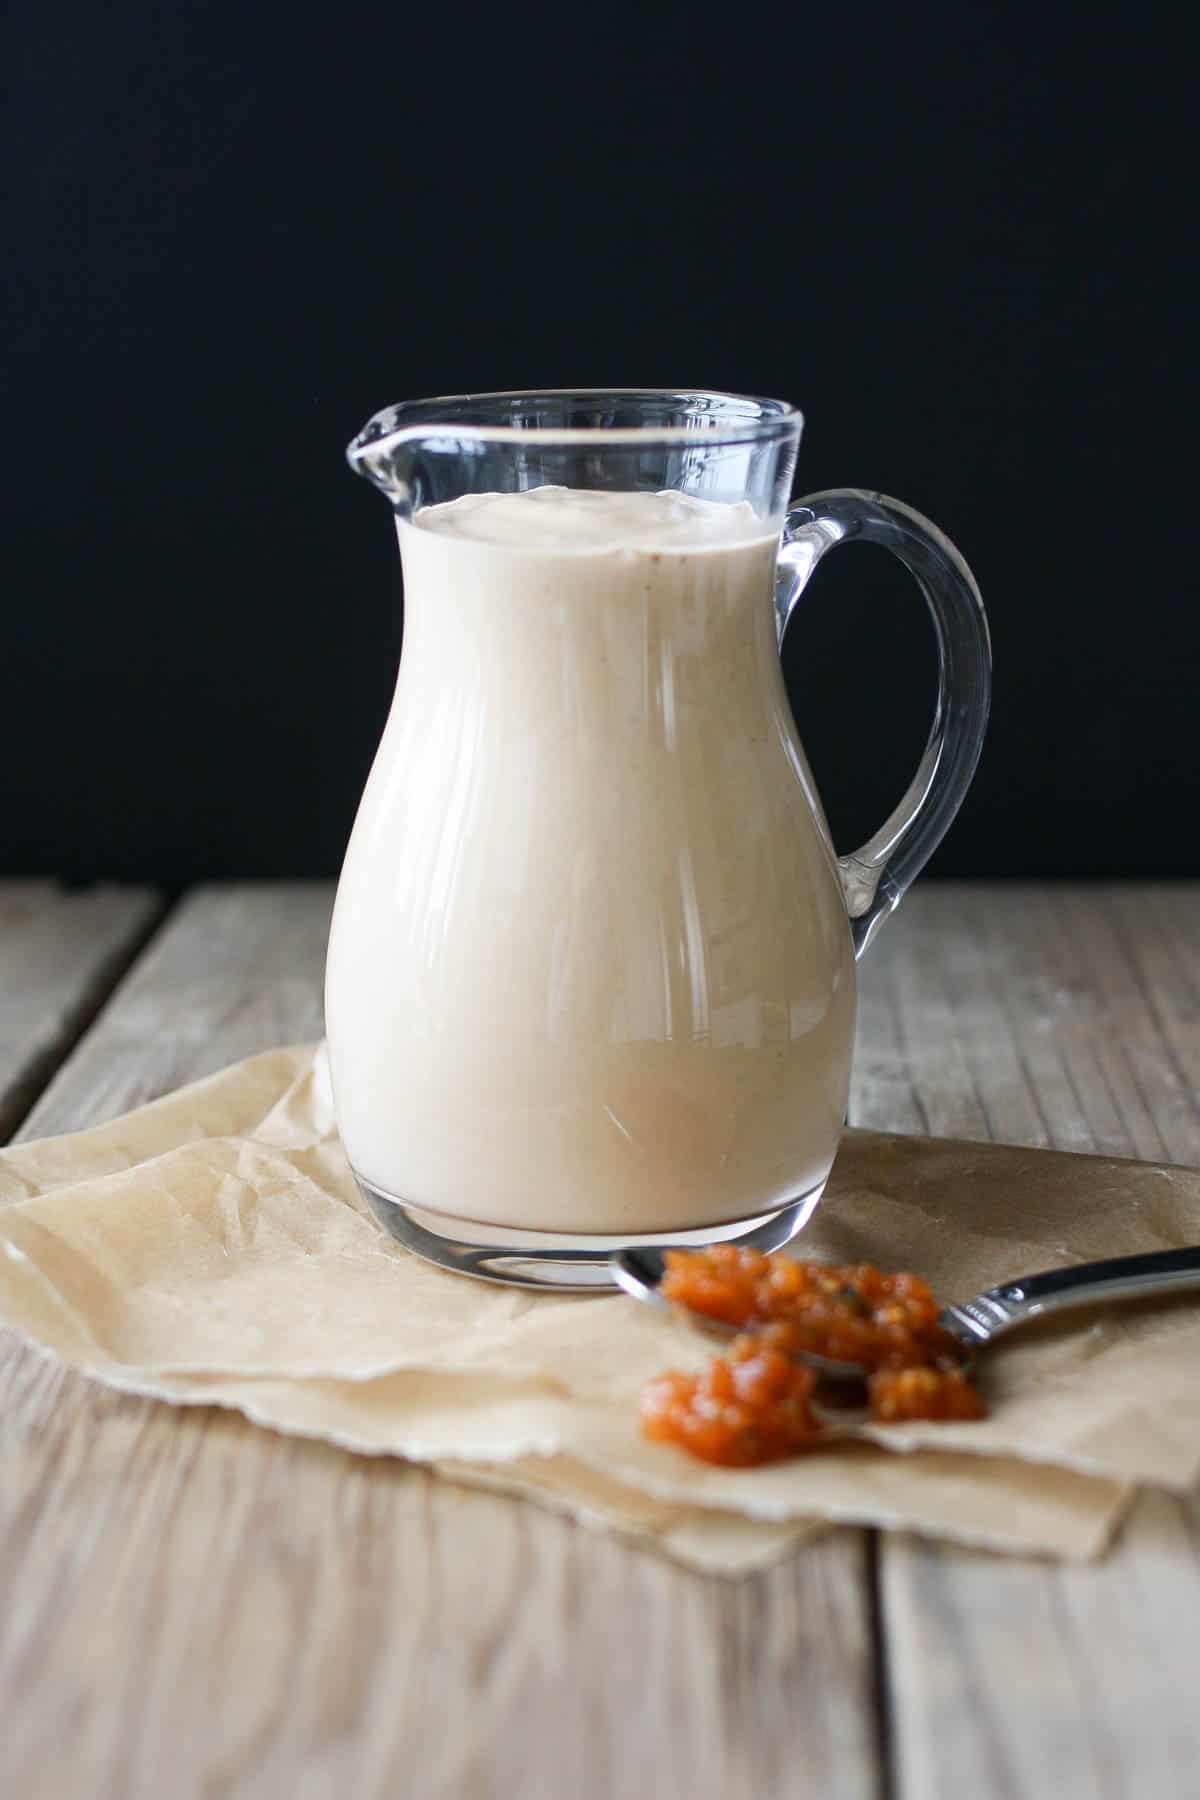 A glass jug filled with crema on a wooden surface